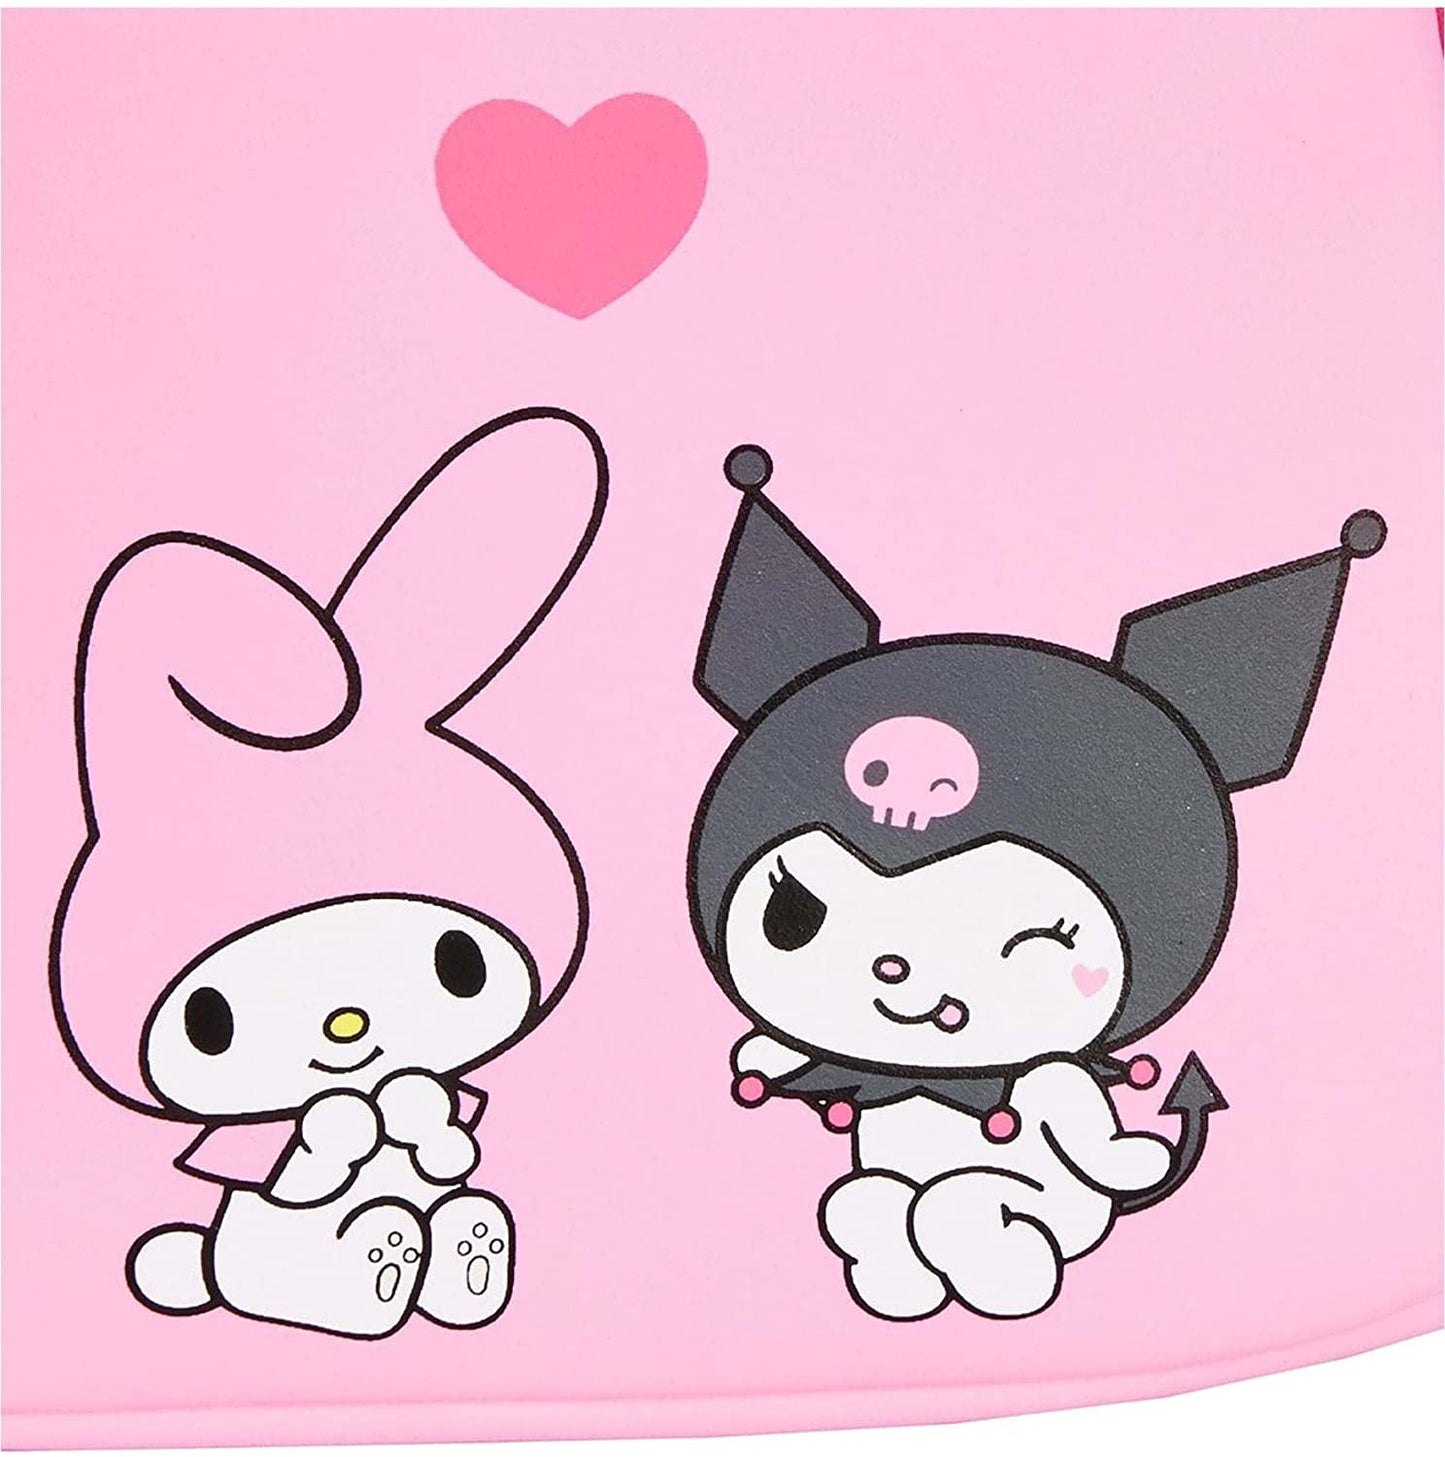 Sanrio My Melody & Kuromi Double Pocket Backpack